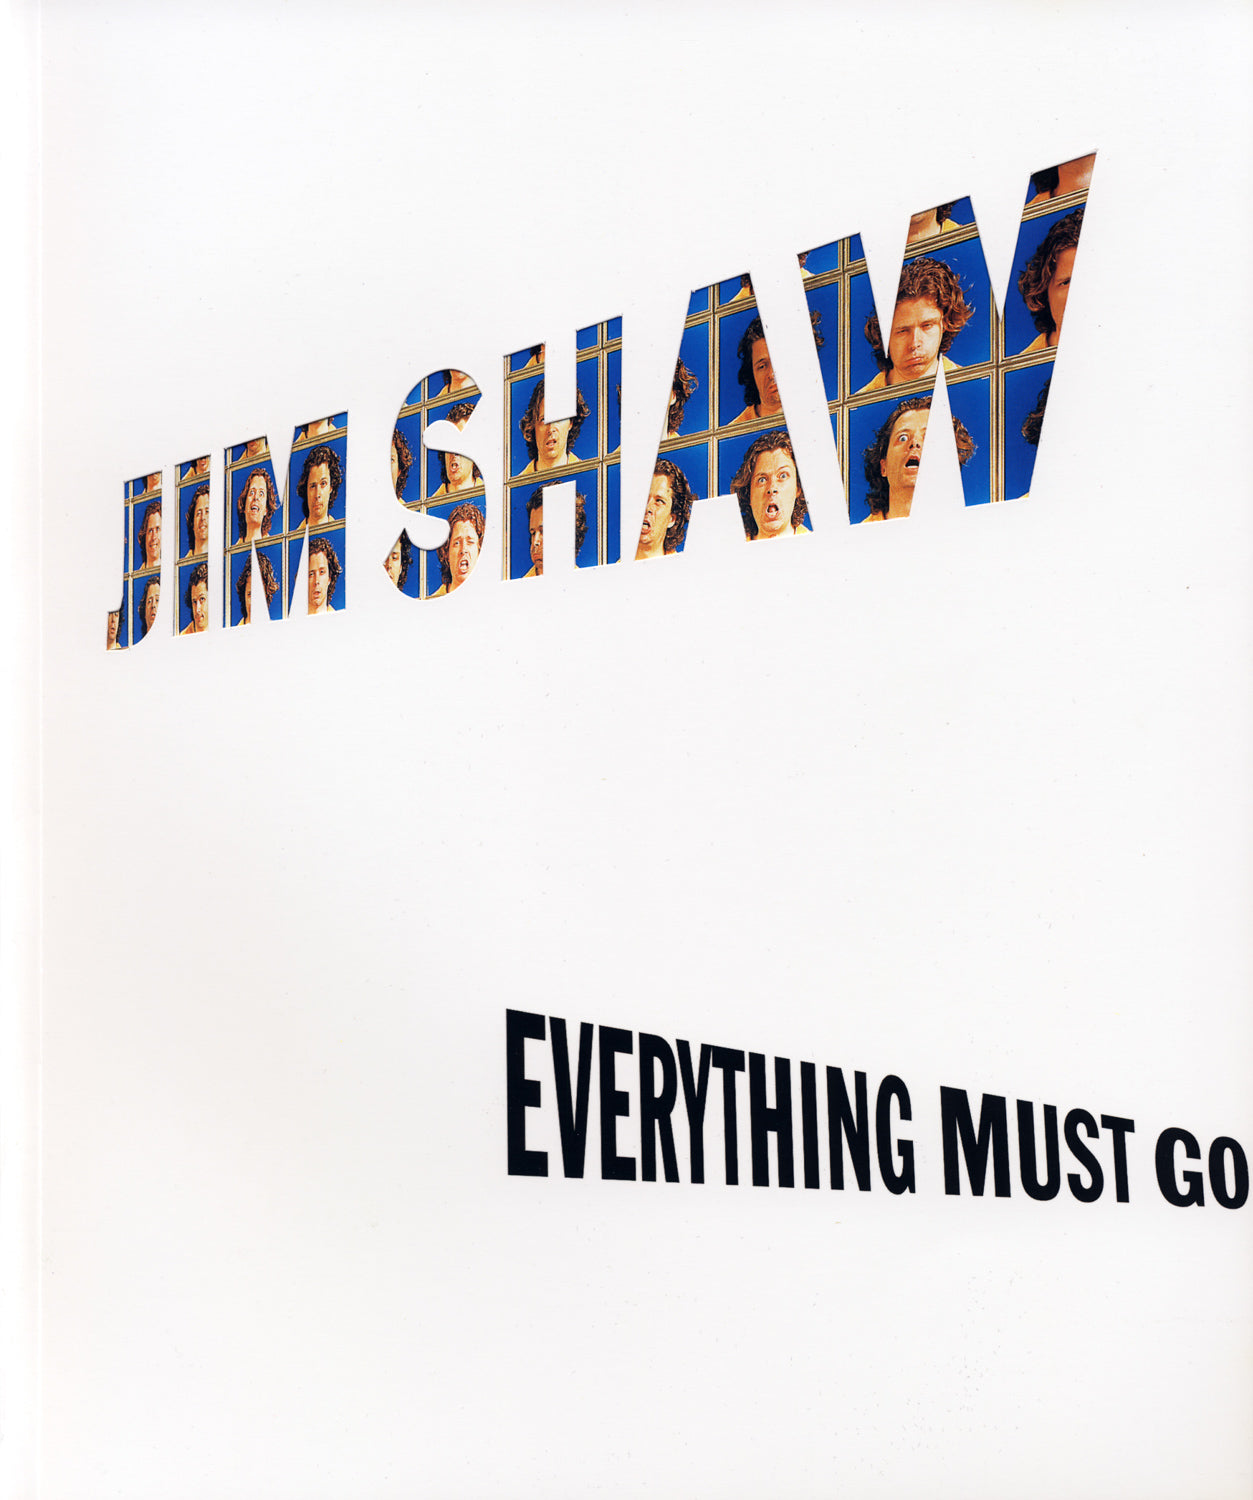 Jim Shaw: Everything Must Go